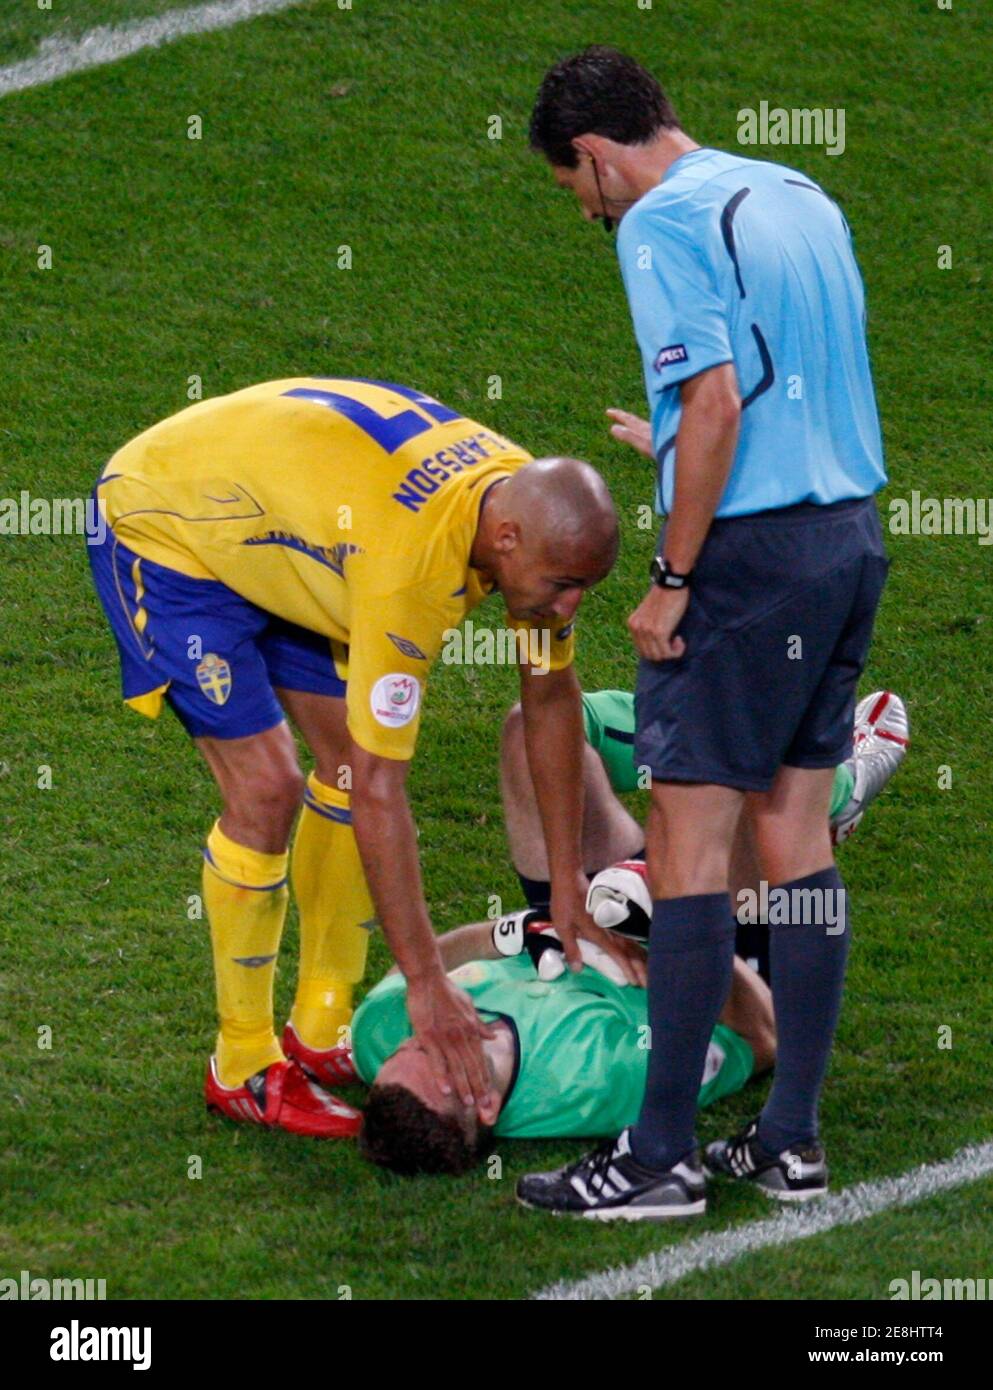 Match referee Frank De Bleeckere of Belgium (R) and Sweden's Henrik Larsson lean over goalkeeper Andreas Isaksson during their Group D Euro 2008 soccer match against Russia at Tivoli Neu stadium in Innsbruck, June 18, 2008.     REUTERS/Miro Kuzmanovic (AUSTRIA)  MOBILE OUT. EDITORIAL USE ONLY Stock Photo